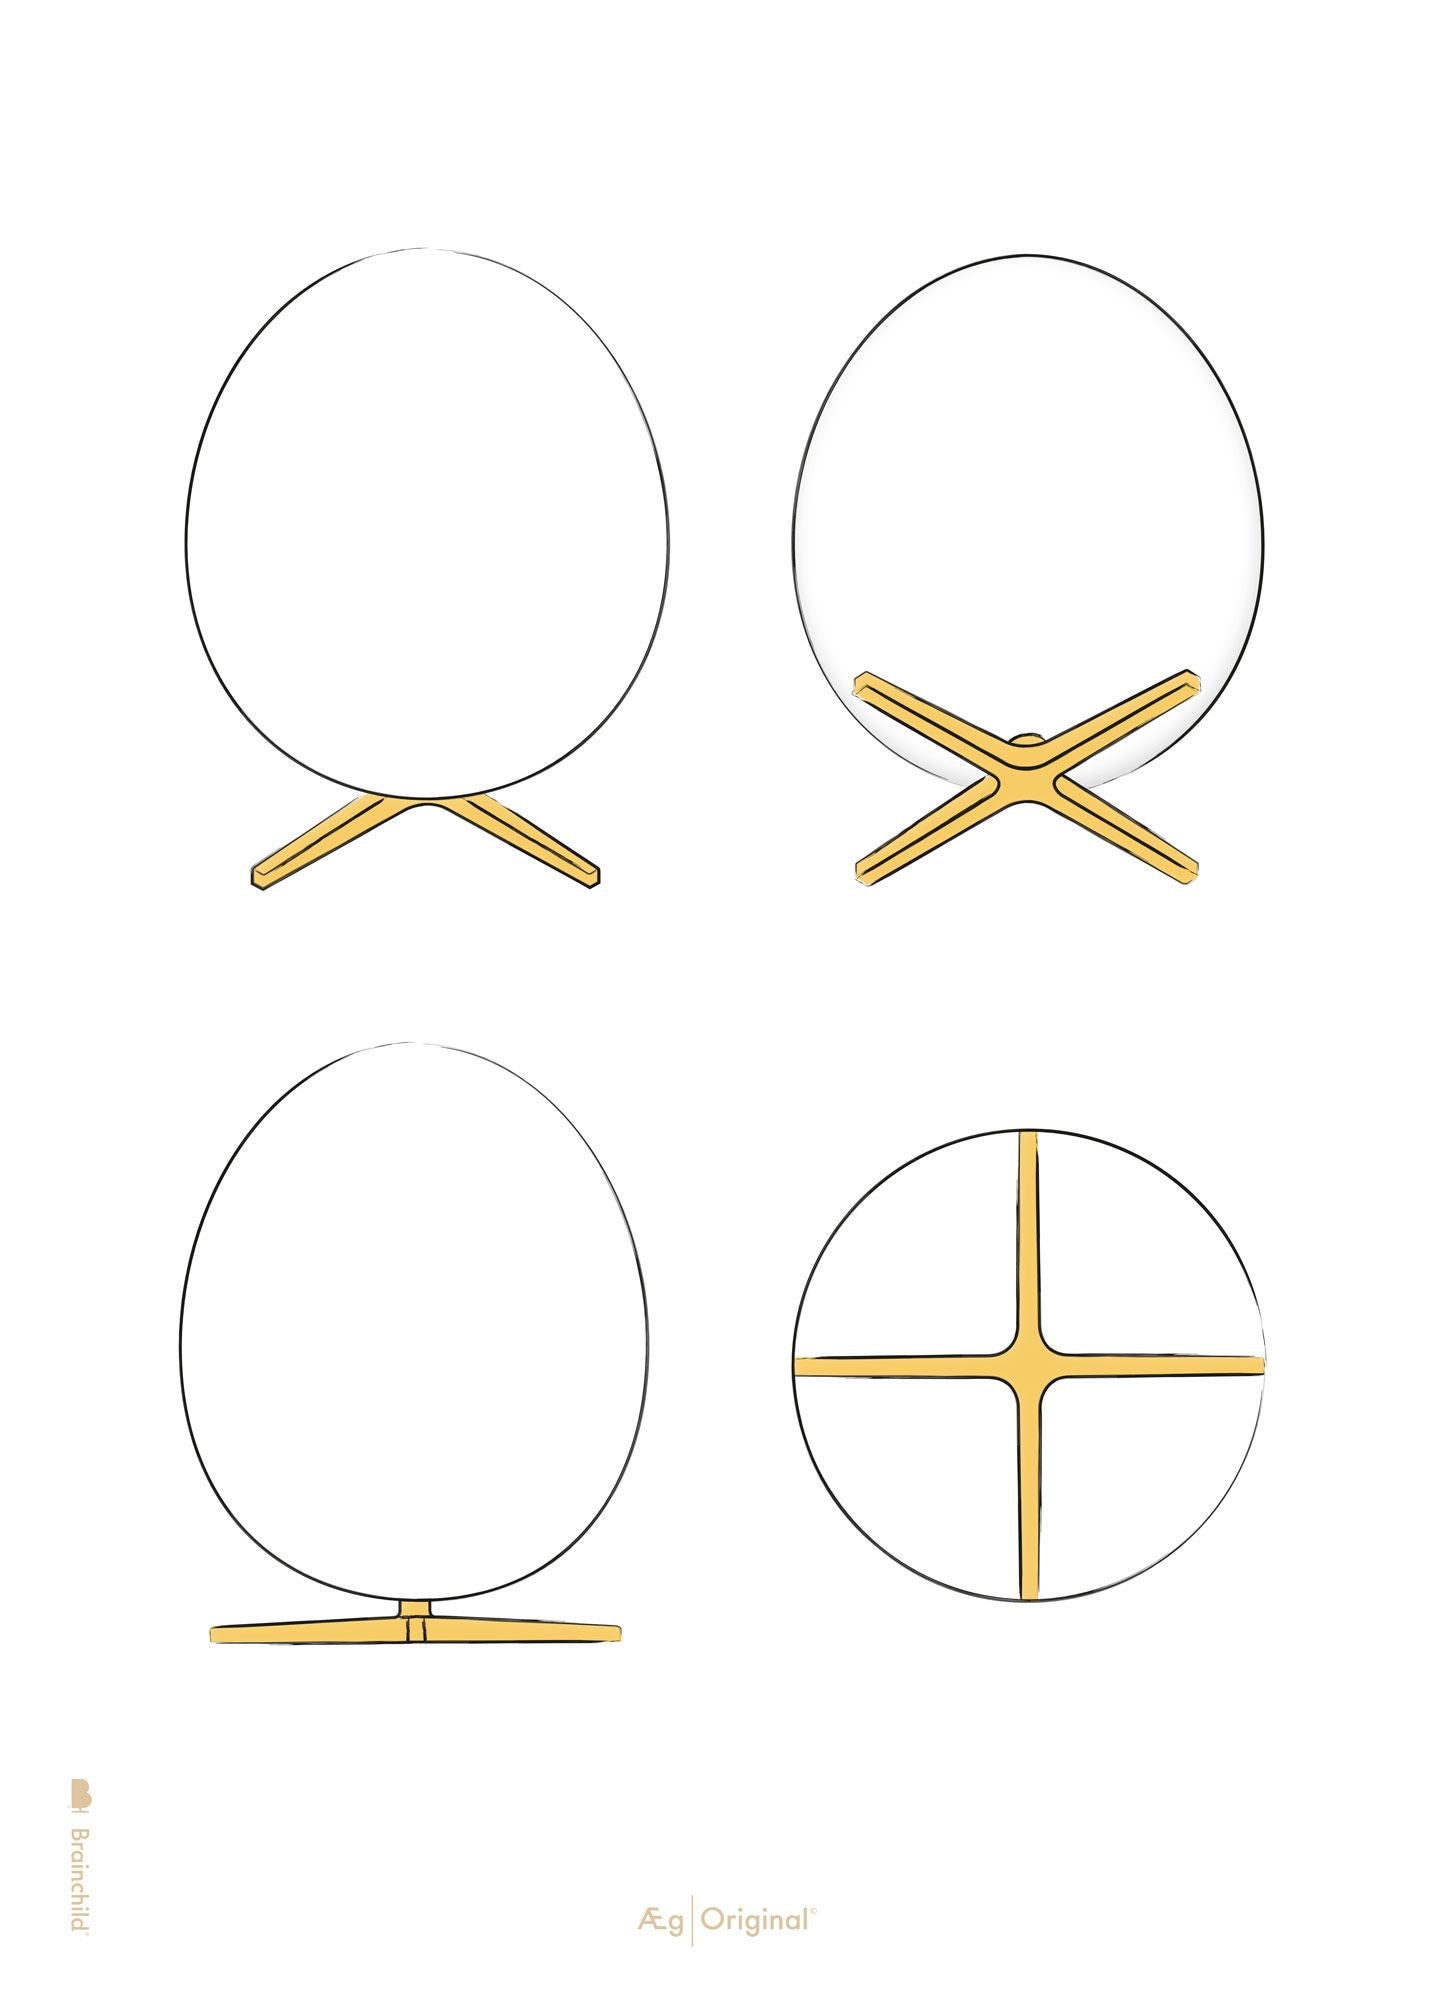 Brainchild The Egg Design Sketches Poster Without Frame 30x40 Cm, White Background